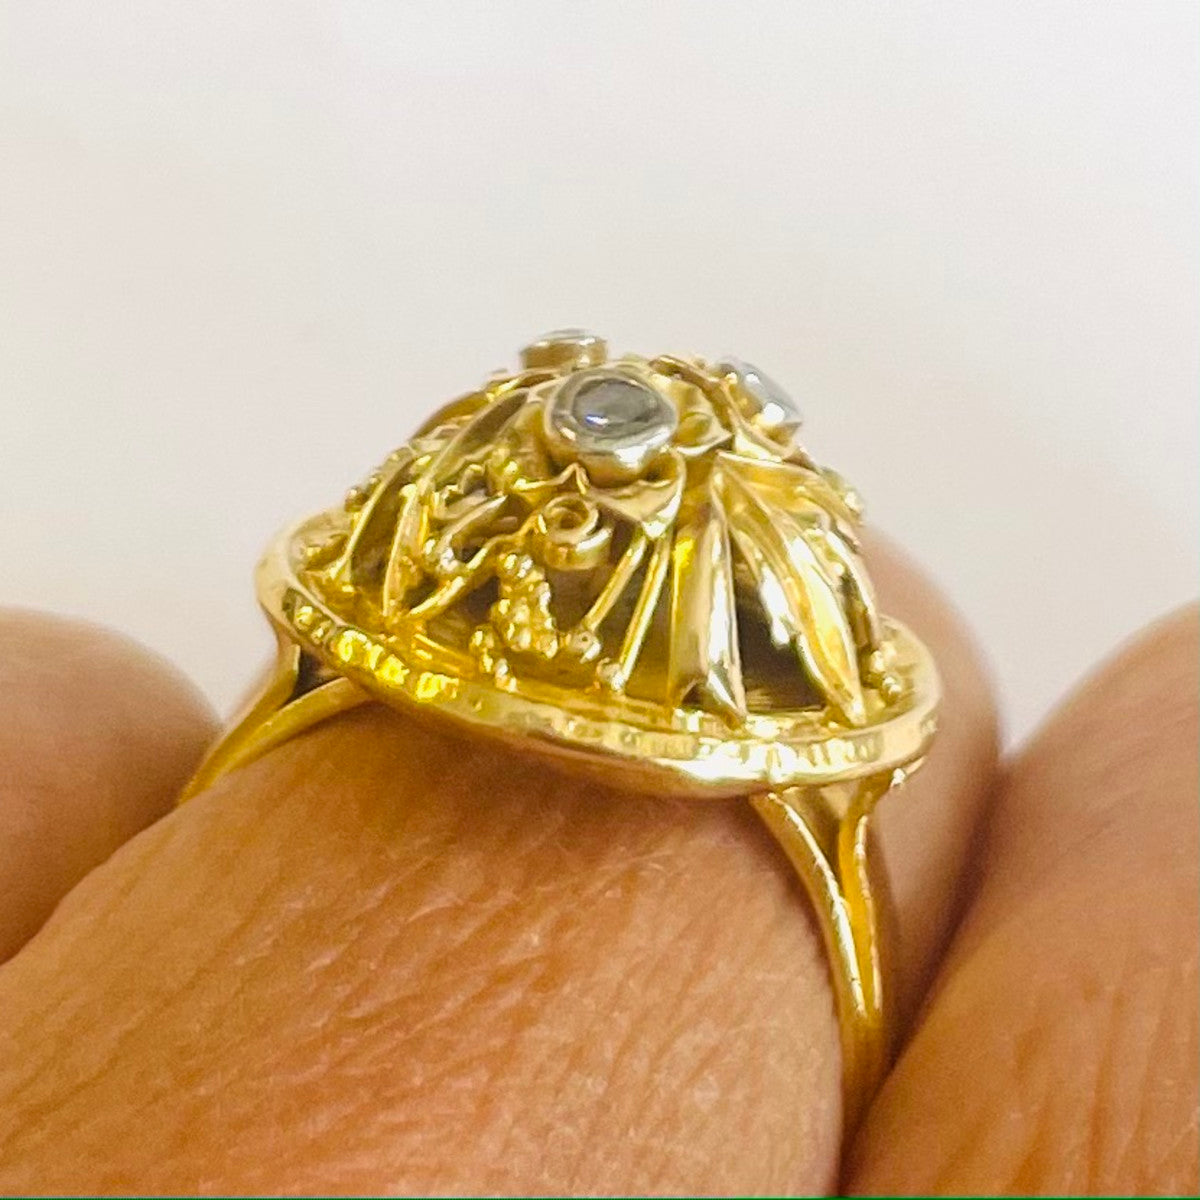 Wilm 1960s 14KT Yellow Gold Diamond Ring close-up on finger